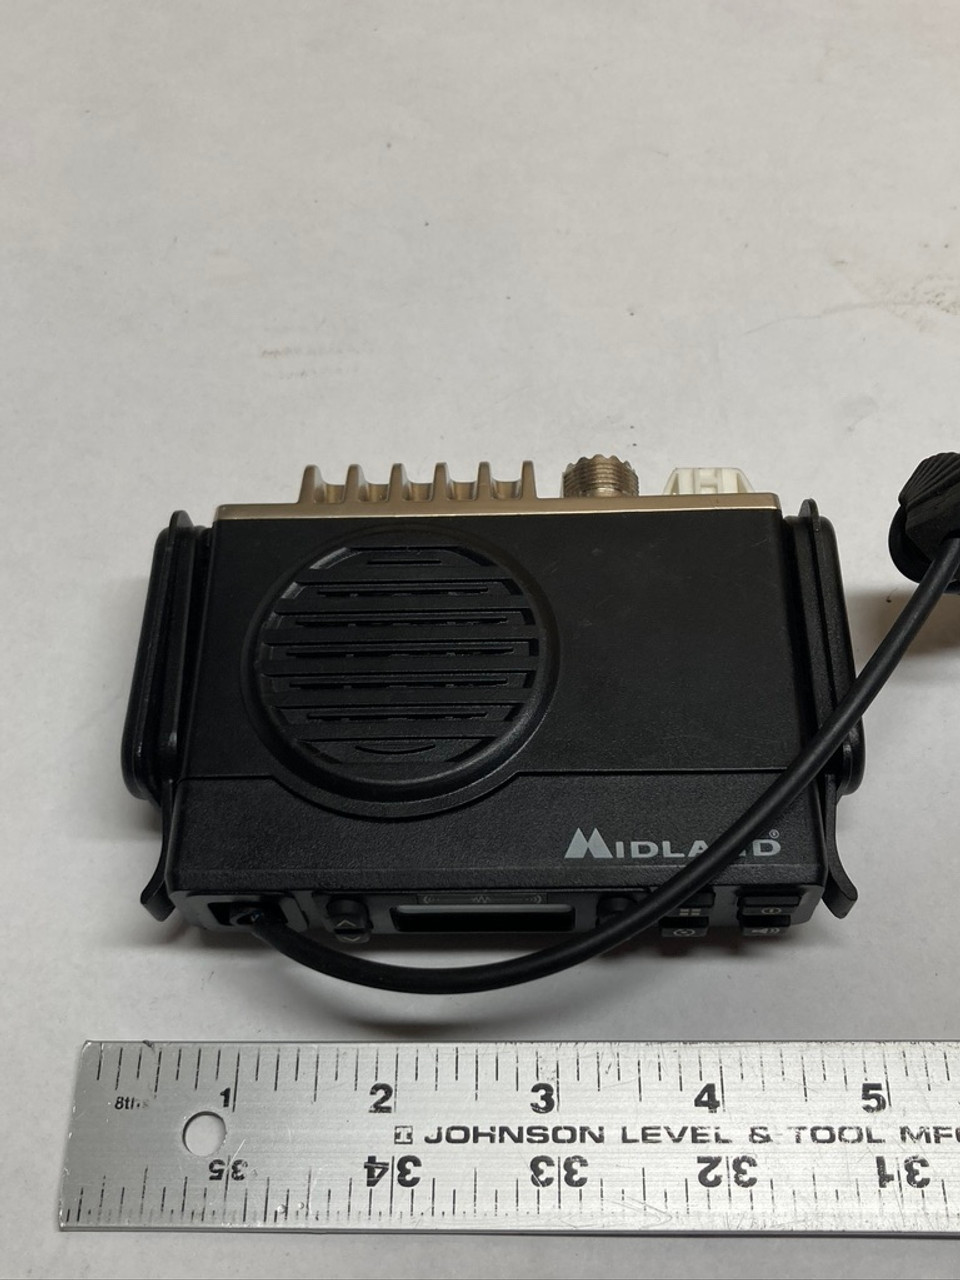 MicroMobile GMRS Two-Way Radio MXT90 Midland (with MA90 Microphone)